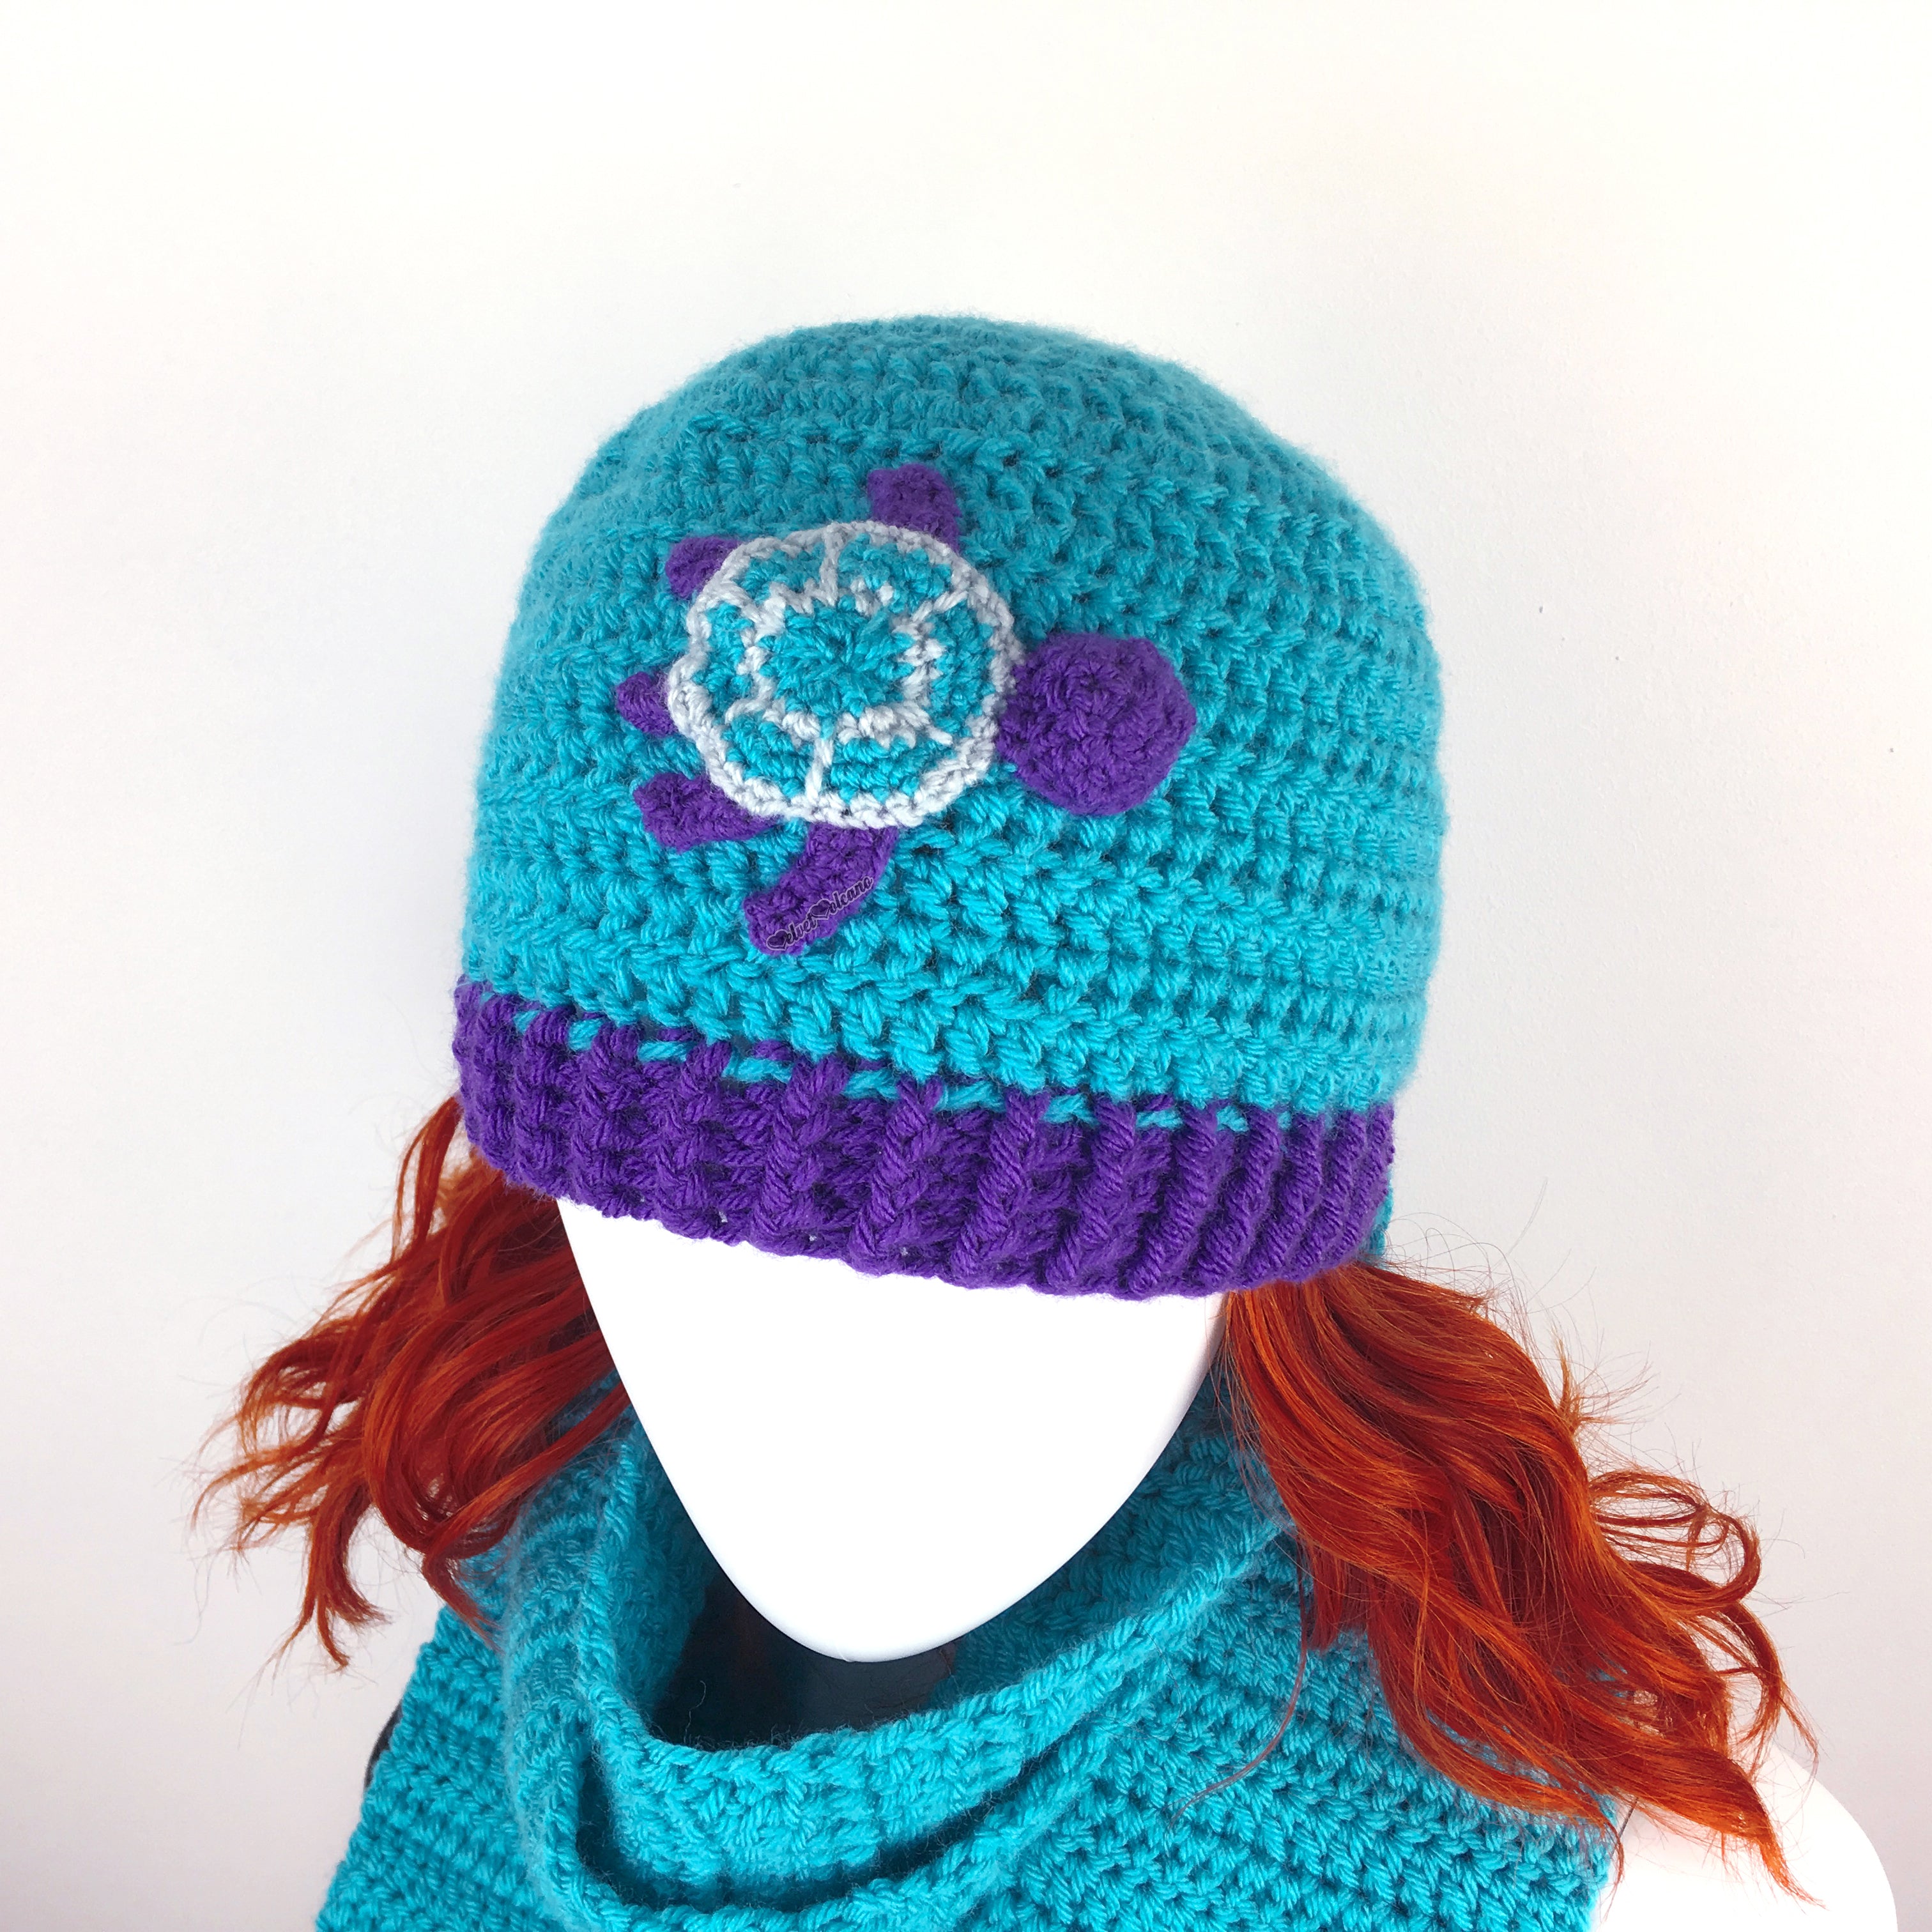 A turquoise crocheted beanie with purple brim and a turquoise, purple and light grey turtle applique on the front.